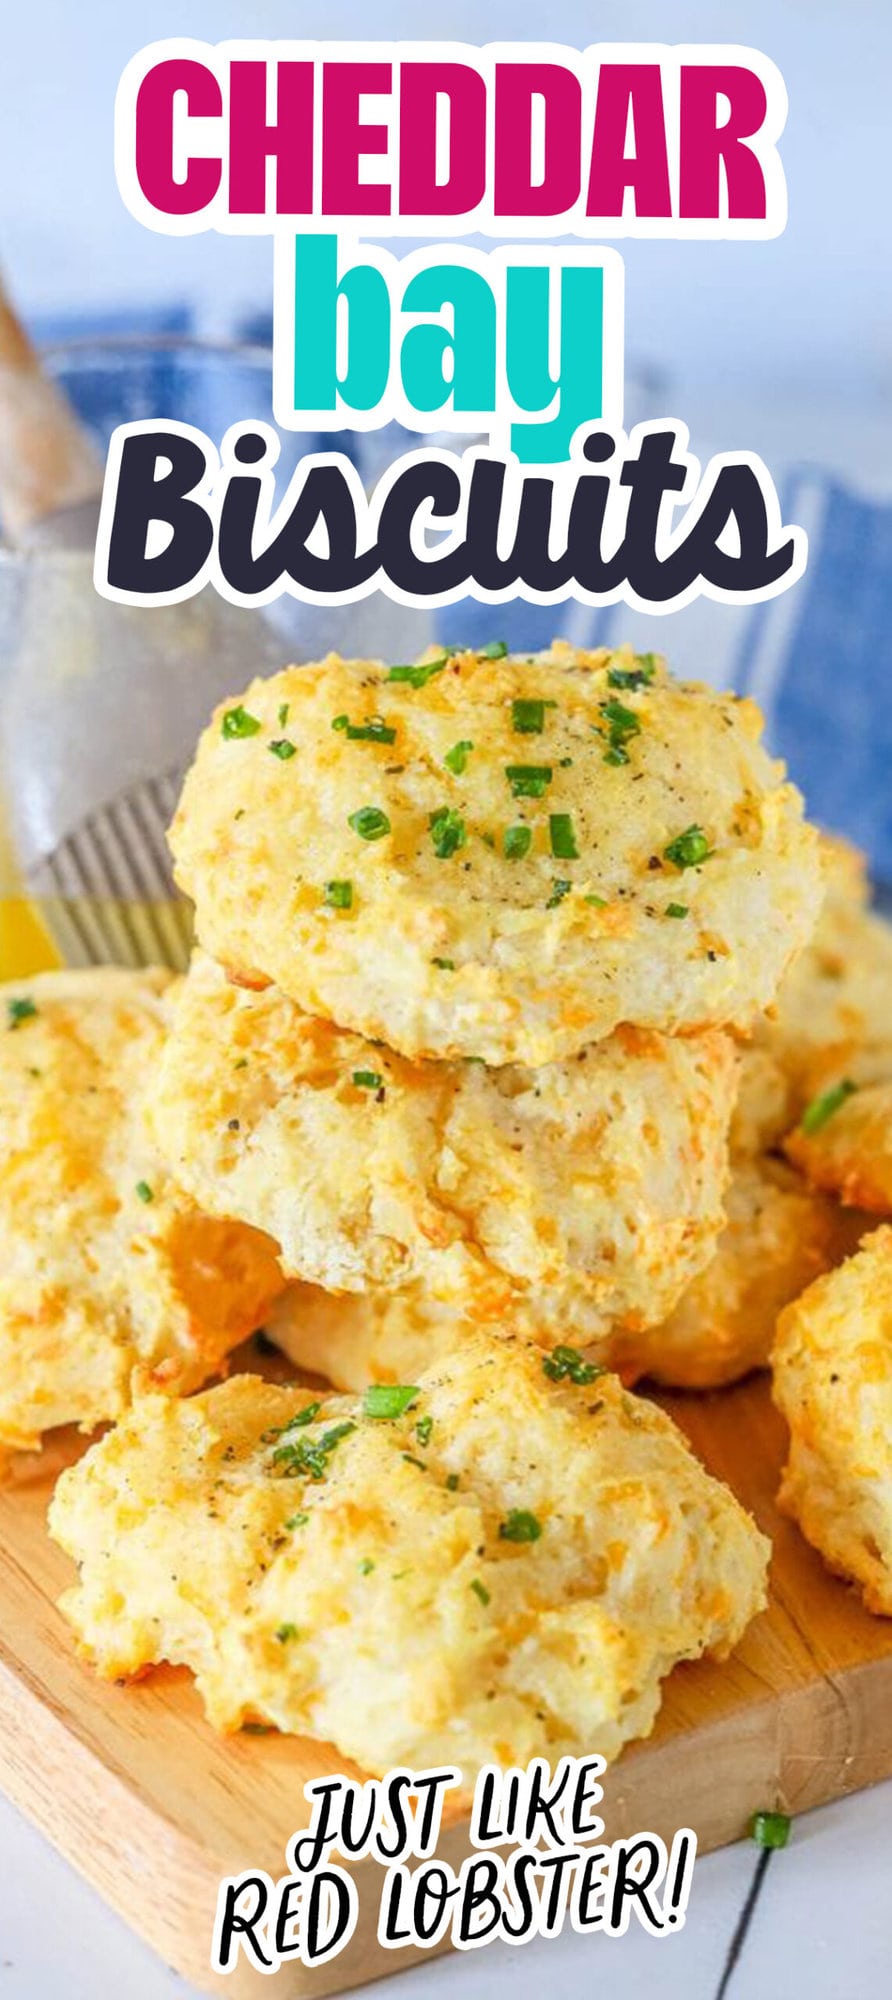 Red Lobster cheddar bay biscuits recipe on a cutting board.